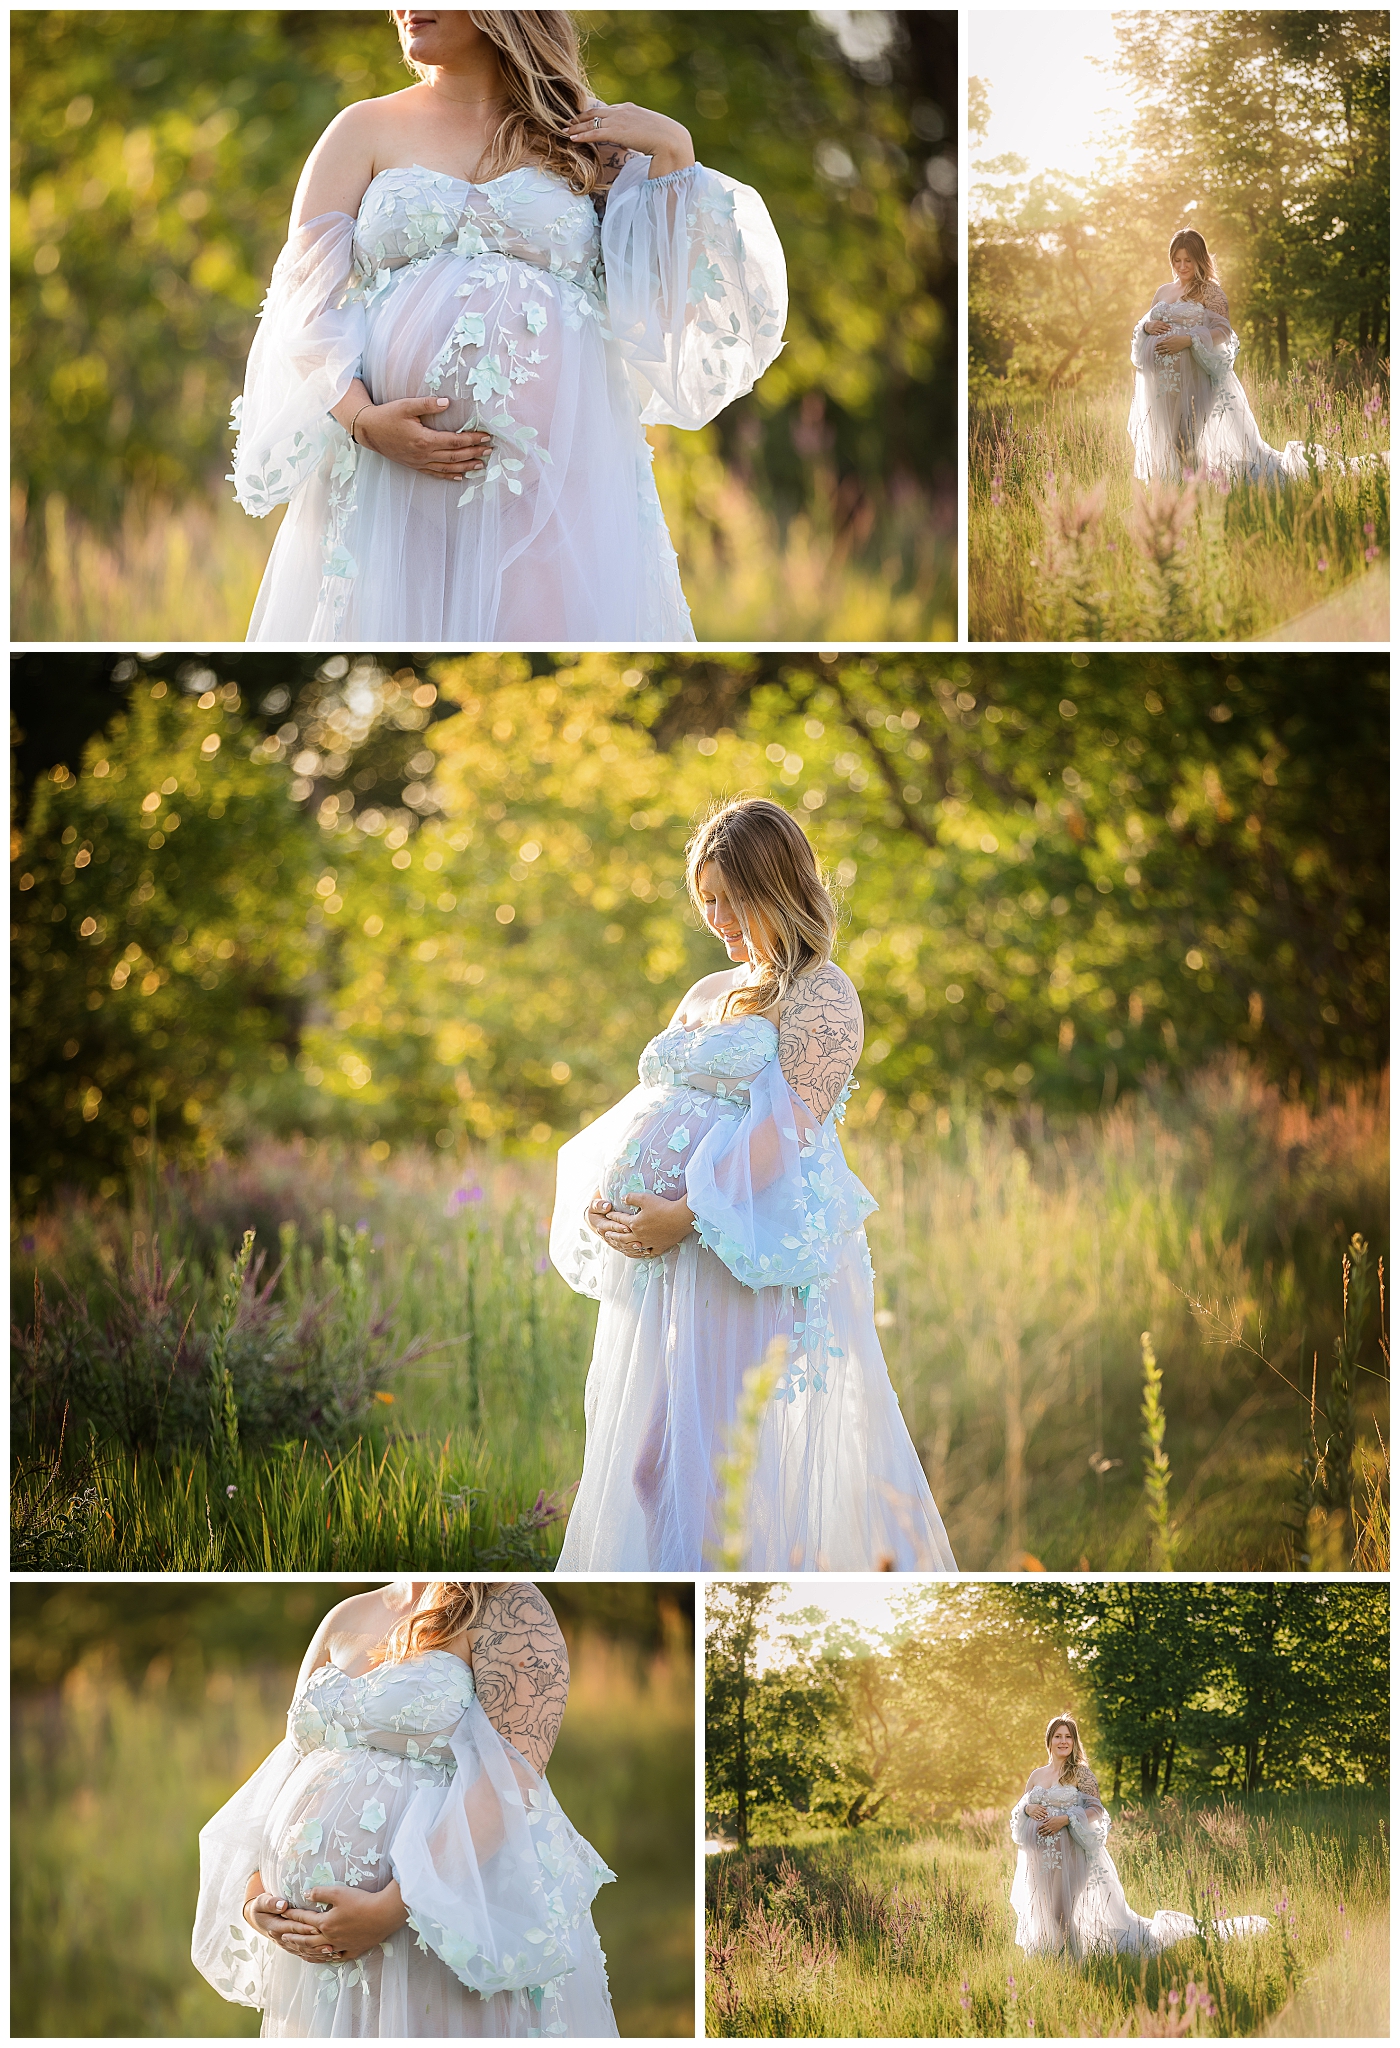 Beautiful pregnant woman wearing a blue gown provided by Jennifer Brandes Photography.